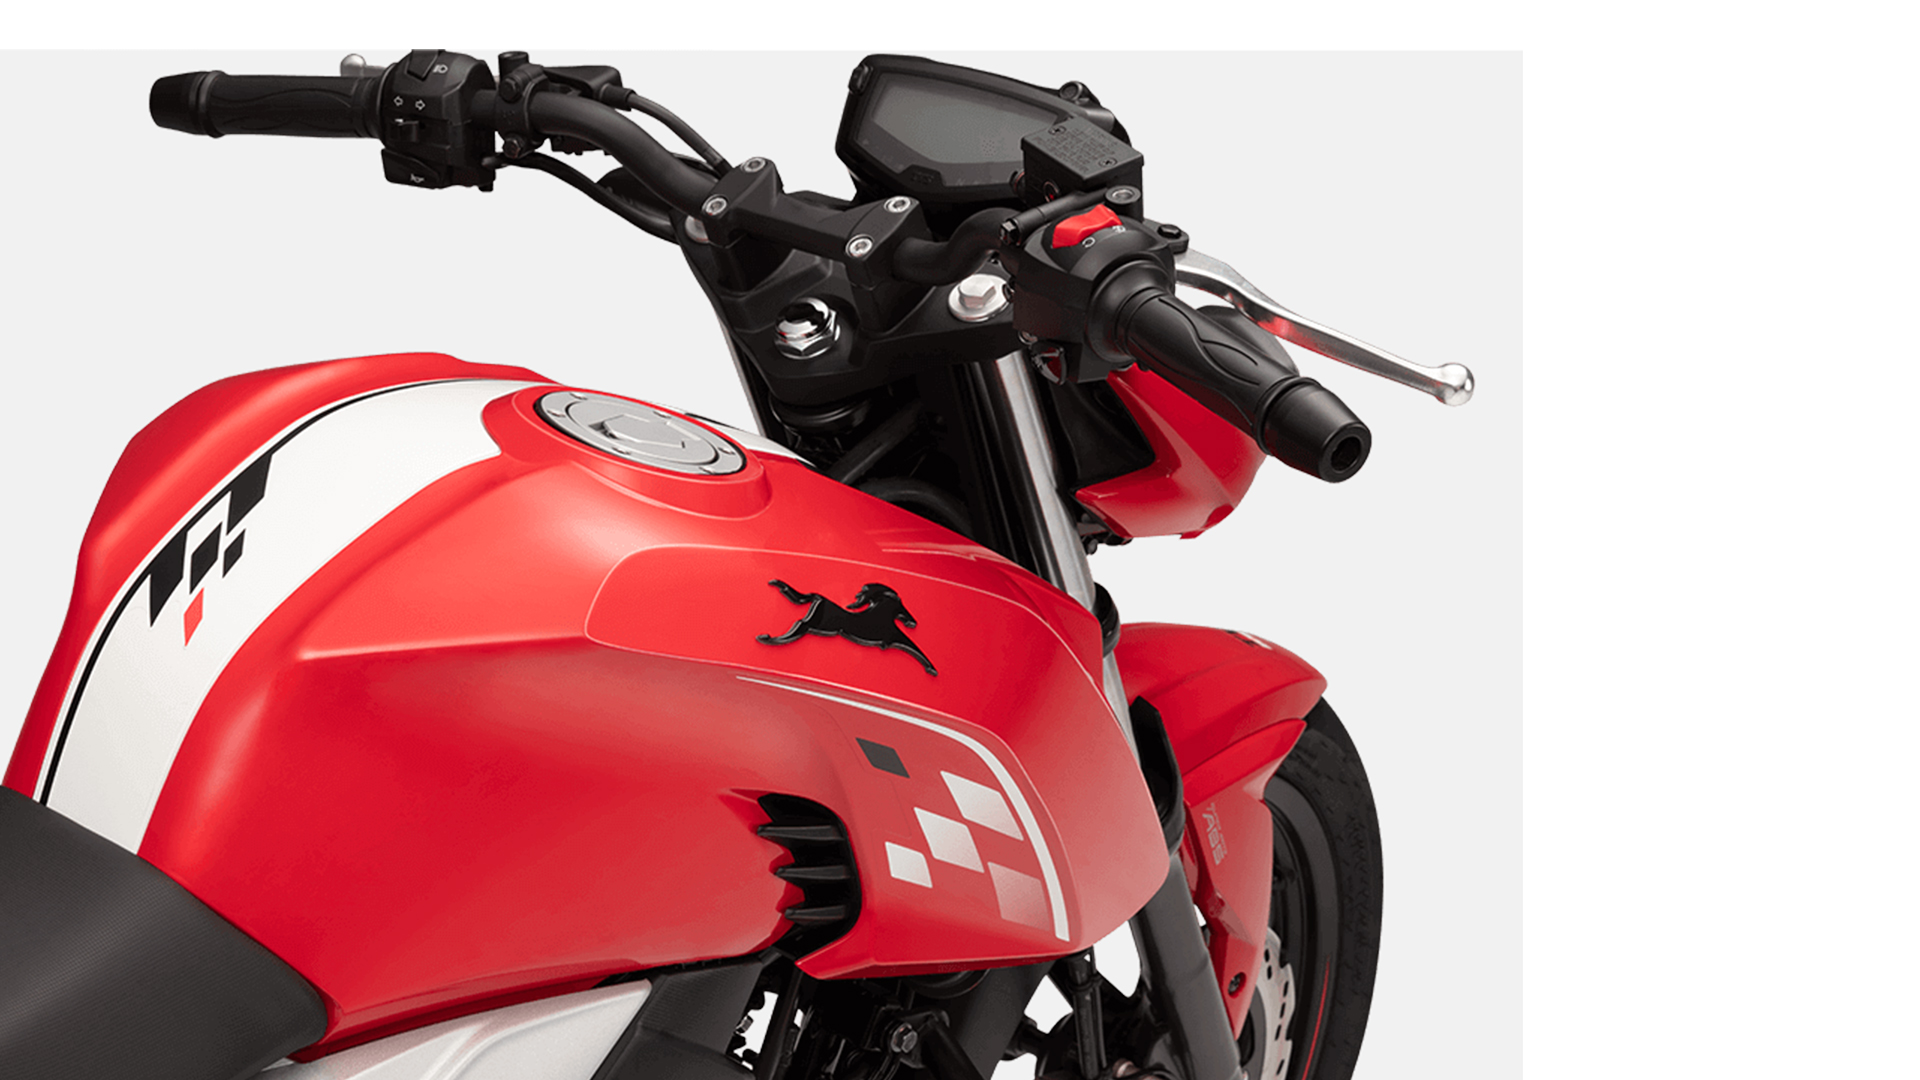 Tvs Apache Rtr 160 4v 18 Std Price Mileage Reviews Specification Gallery Overdrive